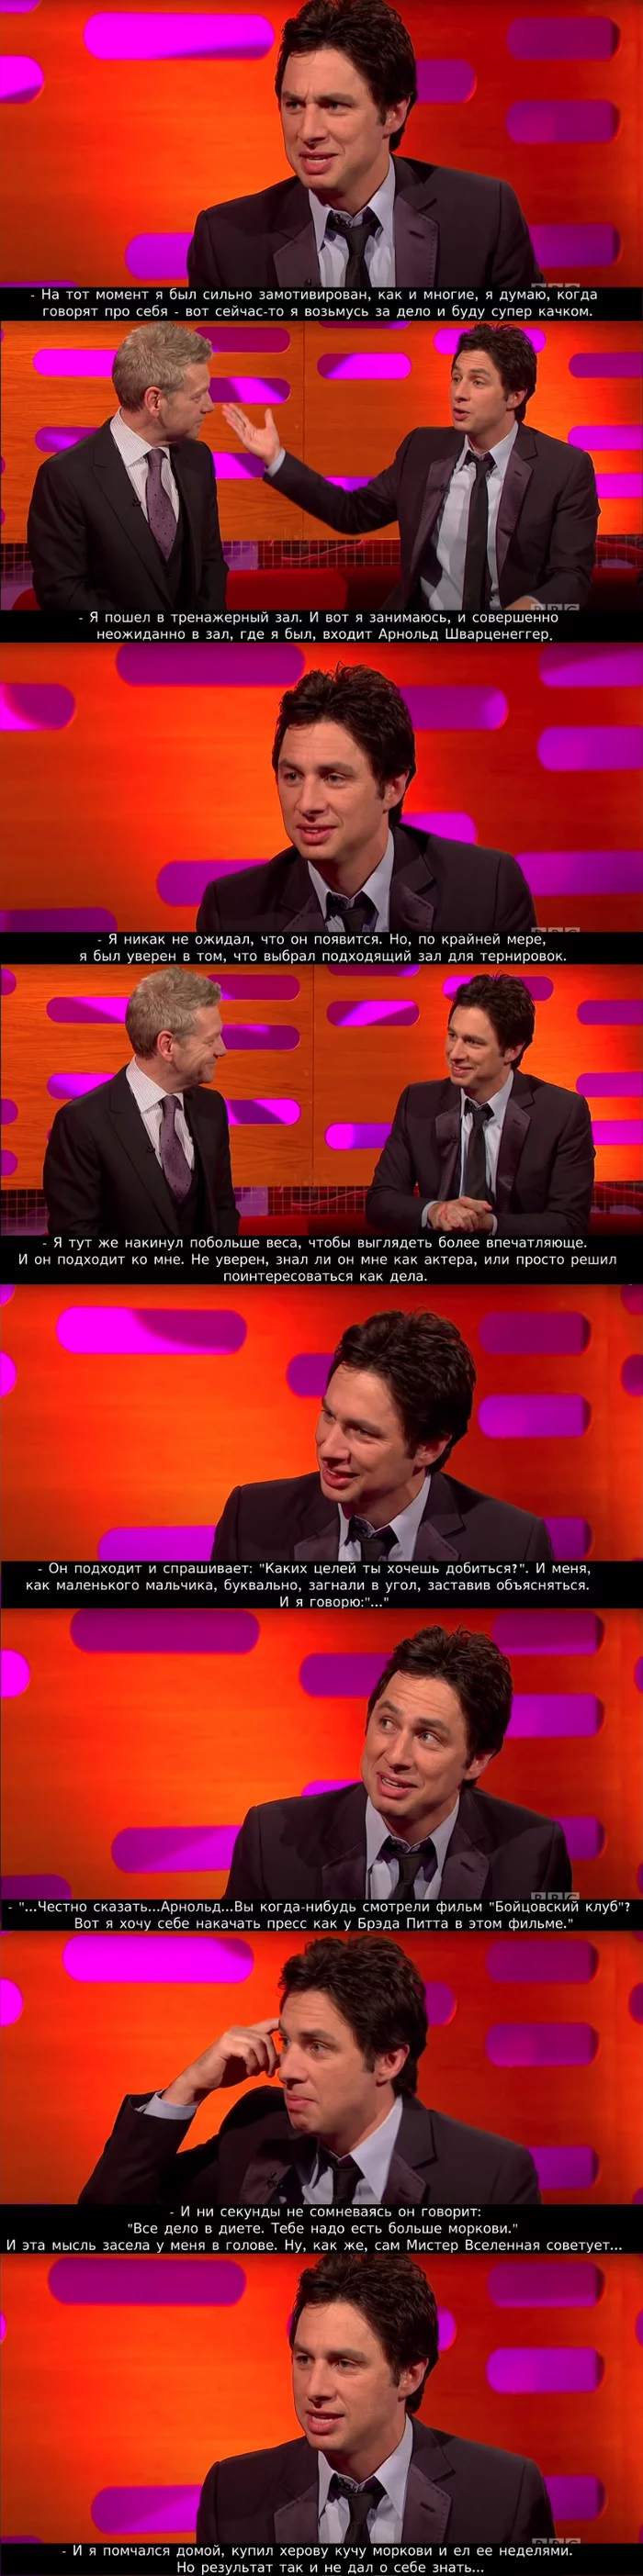 When you can give good advice - Zach Braff, Arnold Schwarzenegger, Gym, Carrot, Clinic, Serials, Actors and actresses, Celebrities, , The Graham Norton Show, Storyboard, Longpost, Press, Fight club, Brad Pitt, Workout, Fight Club (film)